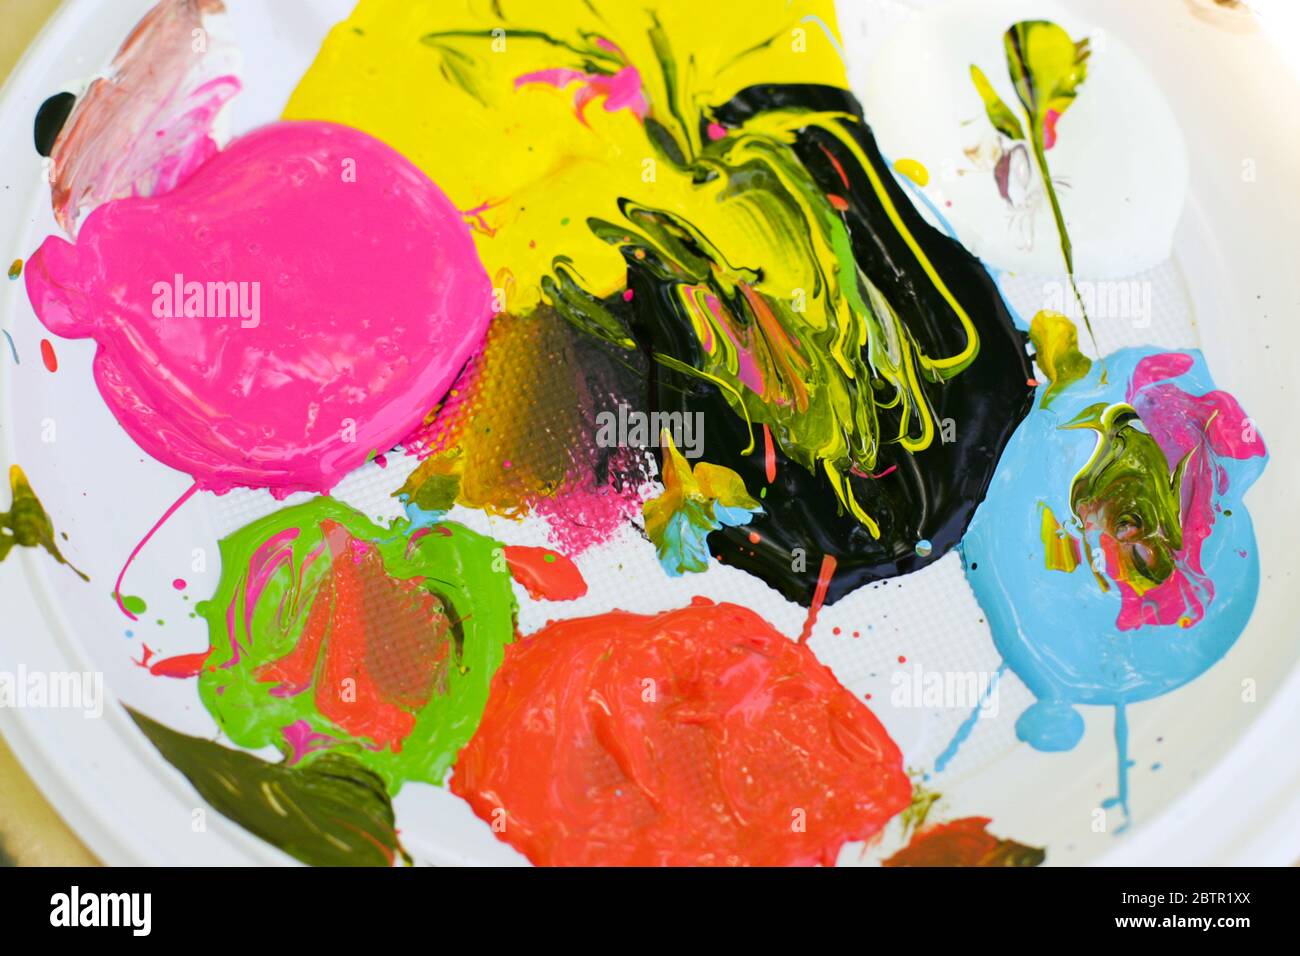 Mixing paint creates colorful abstract shapes.. Stock Photo